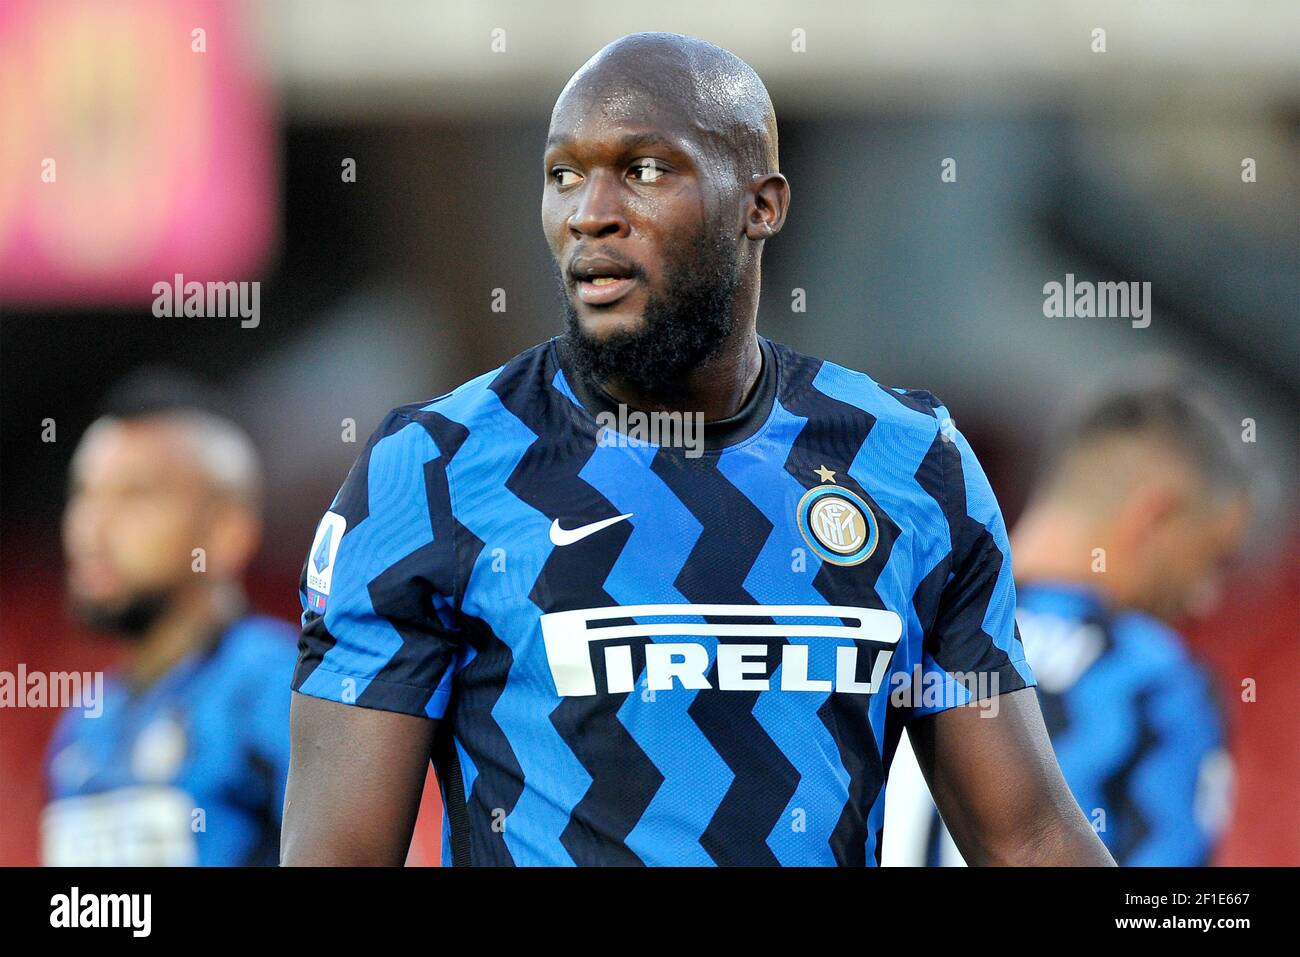 Romelu Lukaku player of Inter, during the match of the Italian football league Serie A between Benevento vs Inter final result 2-5, match played at th Stock Photo